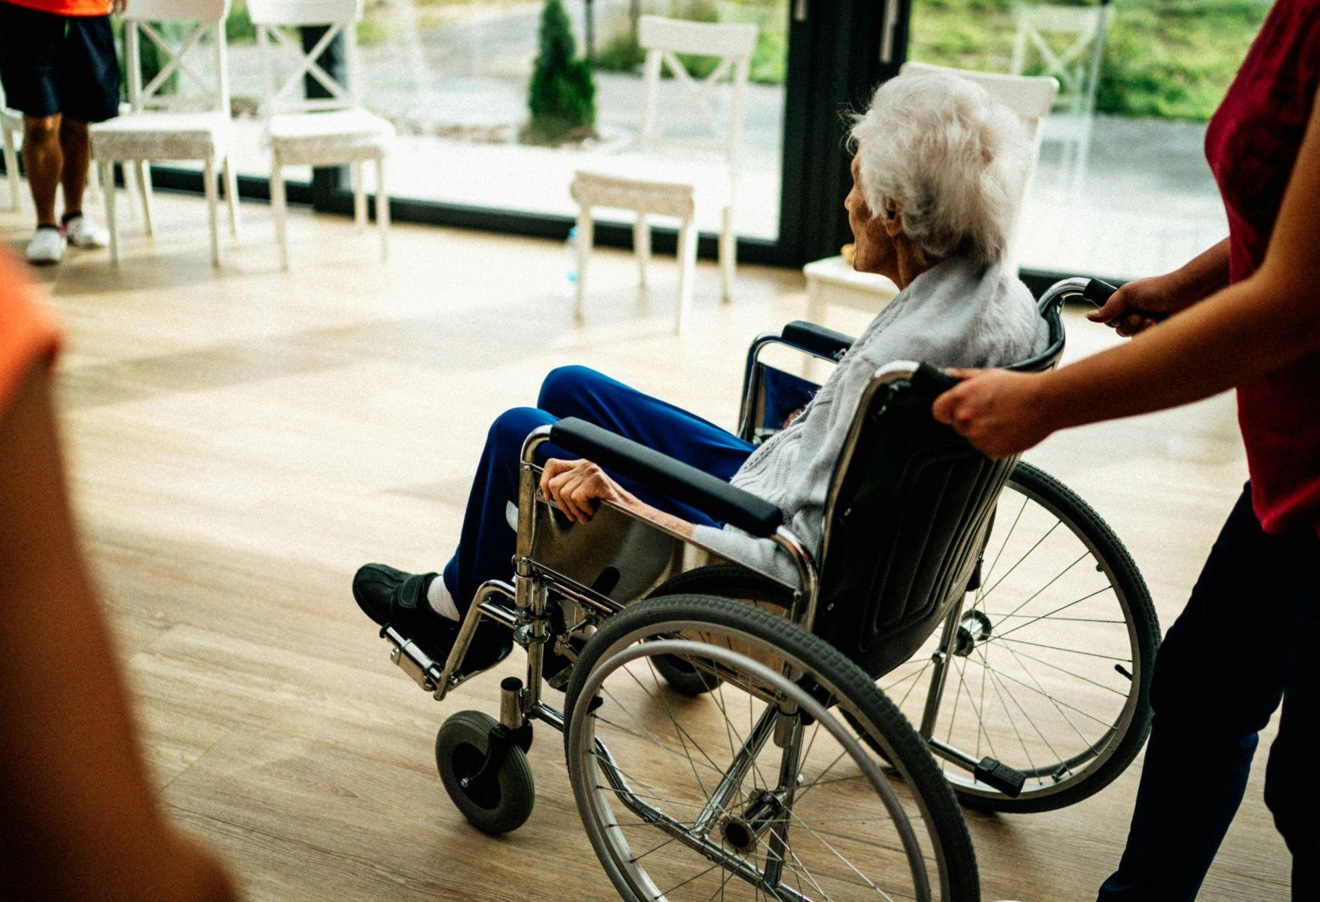 Elderly woman in wheelchair being pushed by female aide; image by Jsme MILA, via Pexels.com.